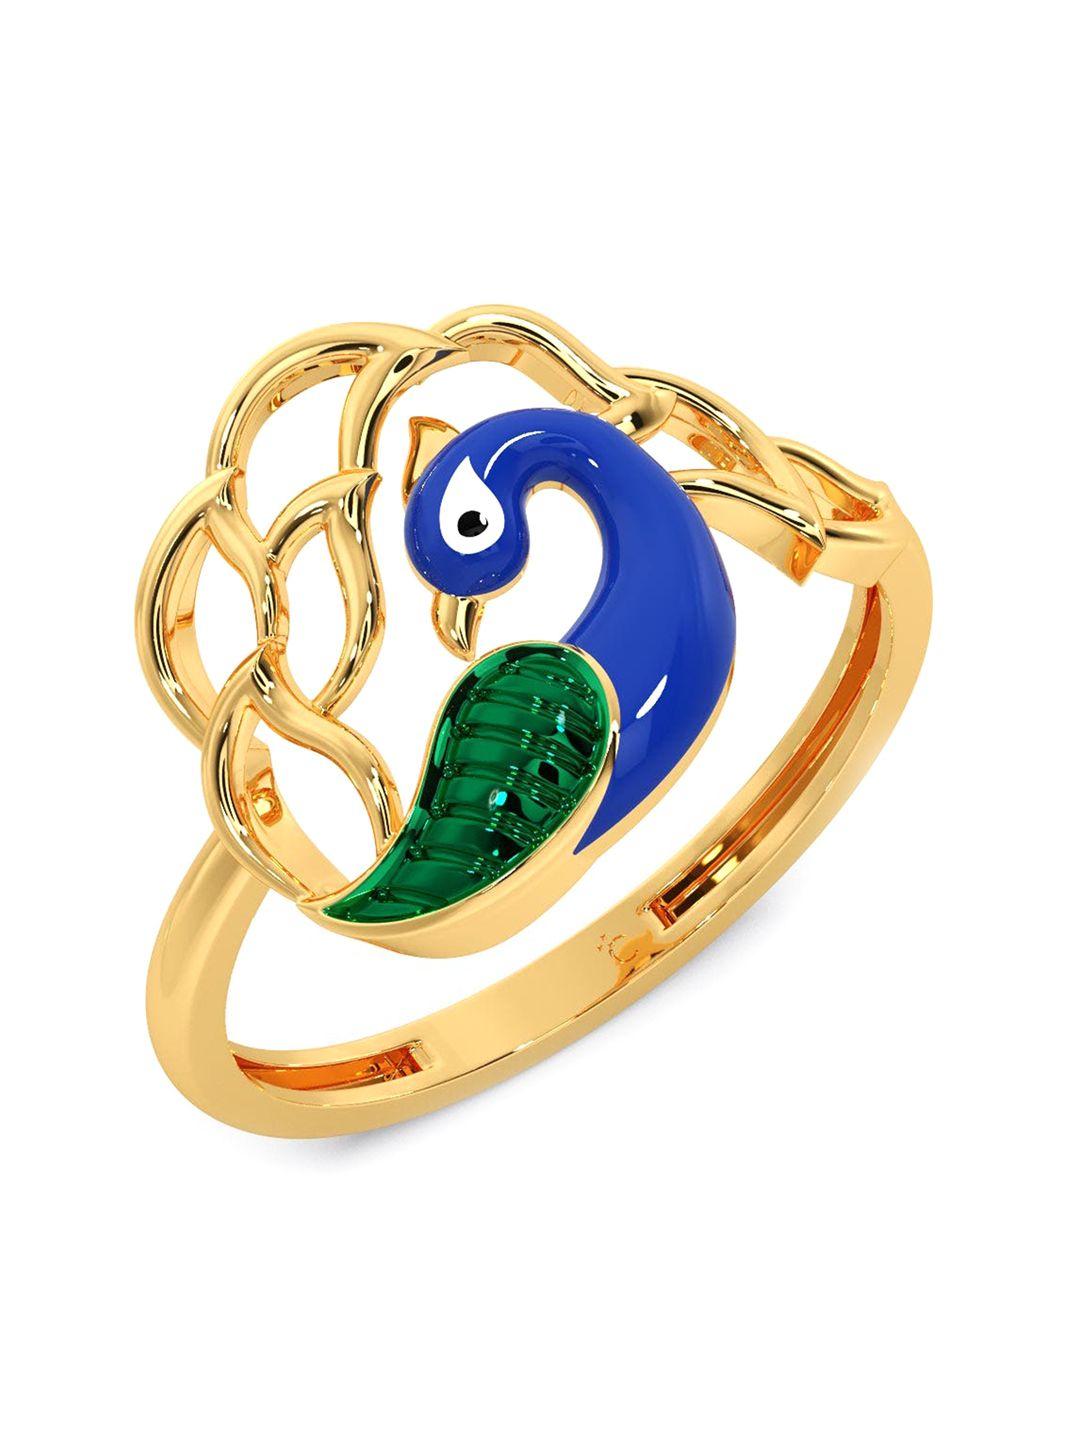 candere a kalyan jewellers company peacock 14kt bis hallmark gold ring-1.93gm